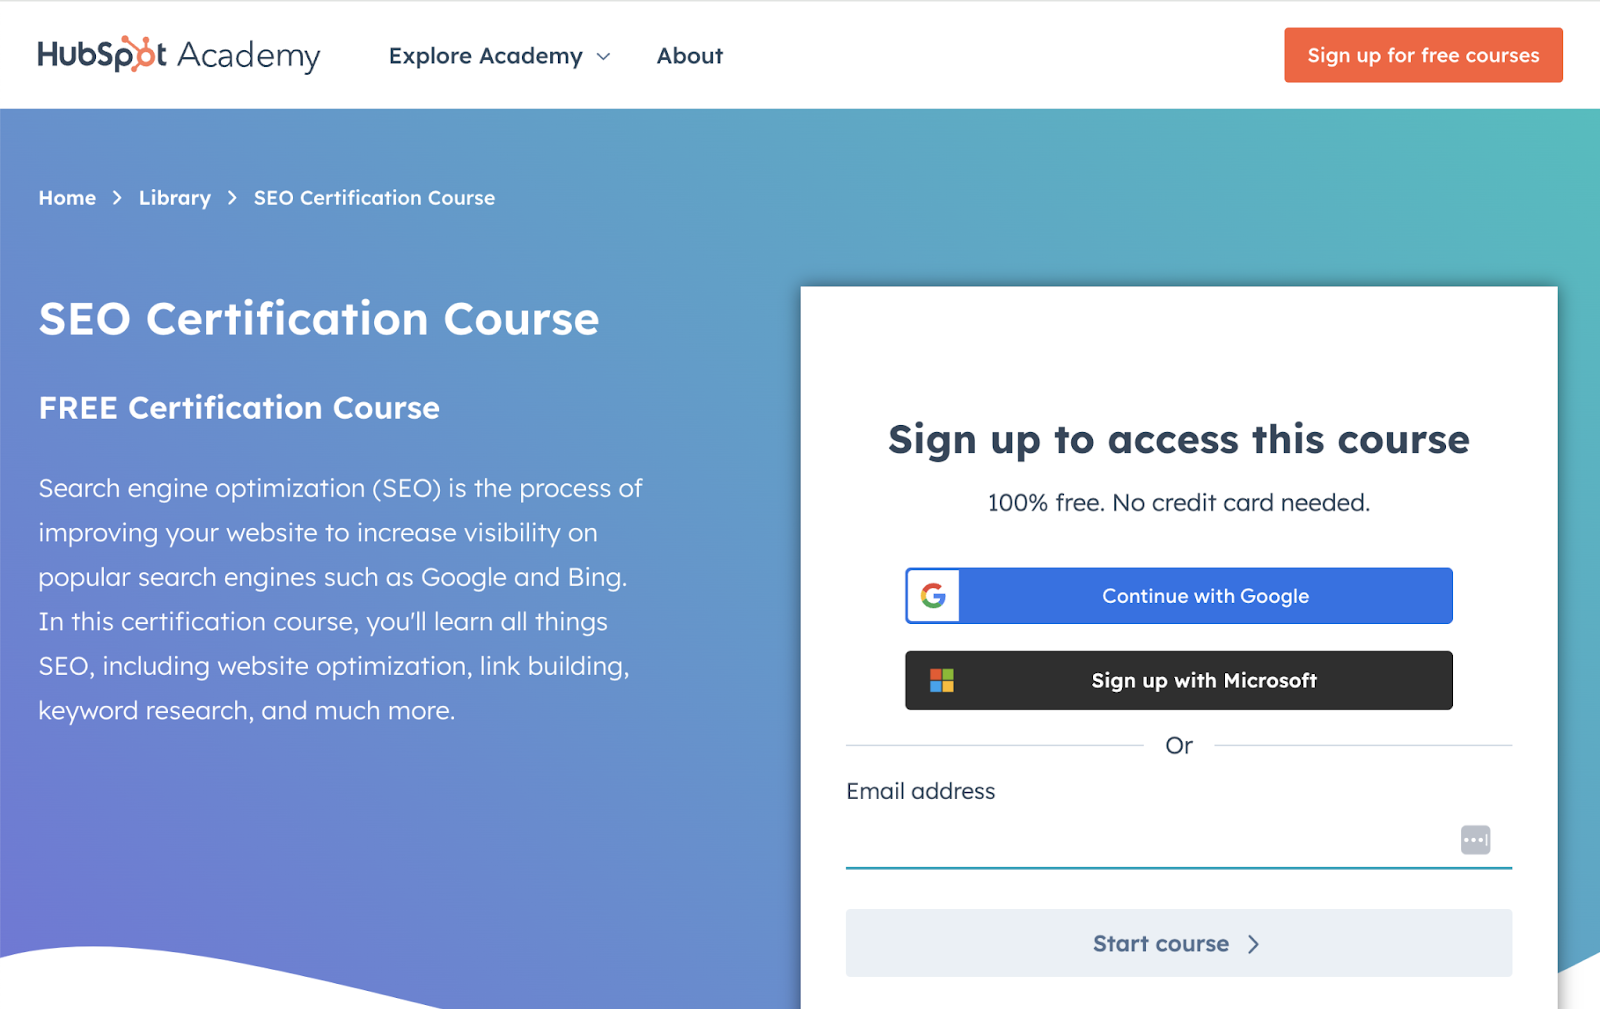 HubSpot's SEO Certification Course page